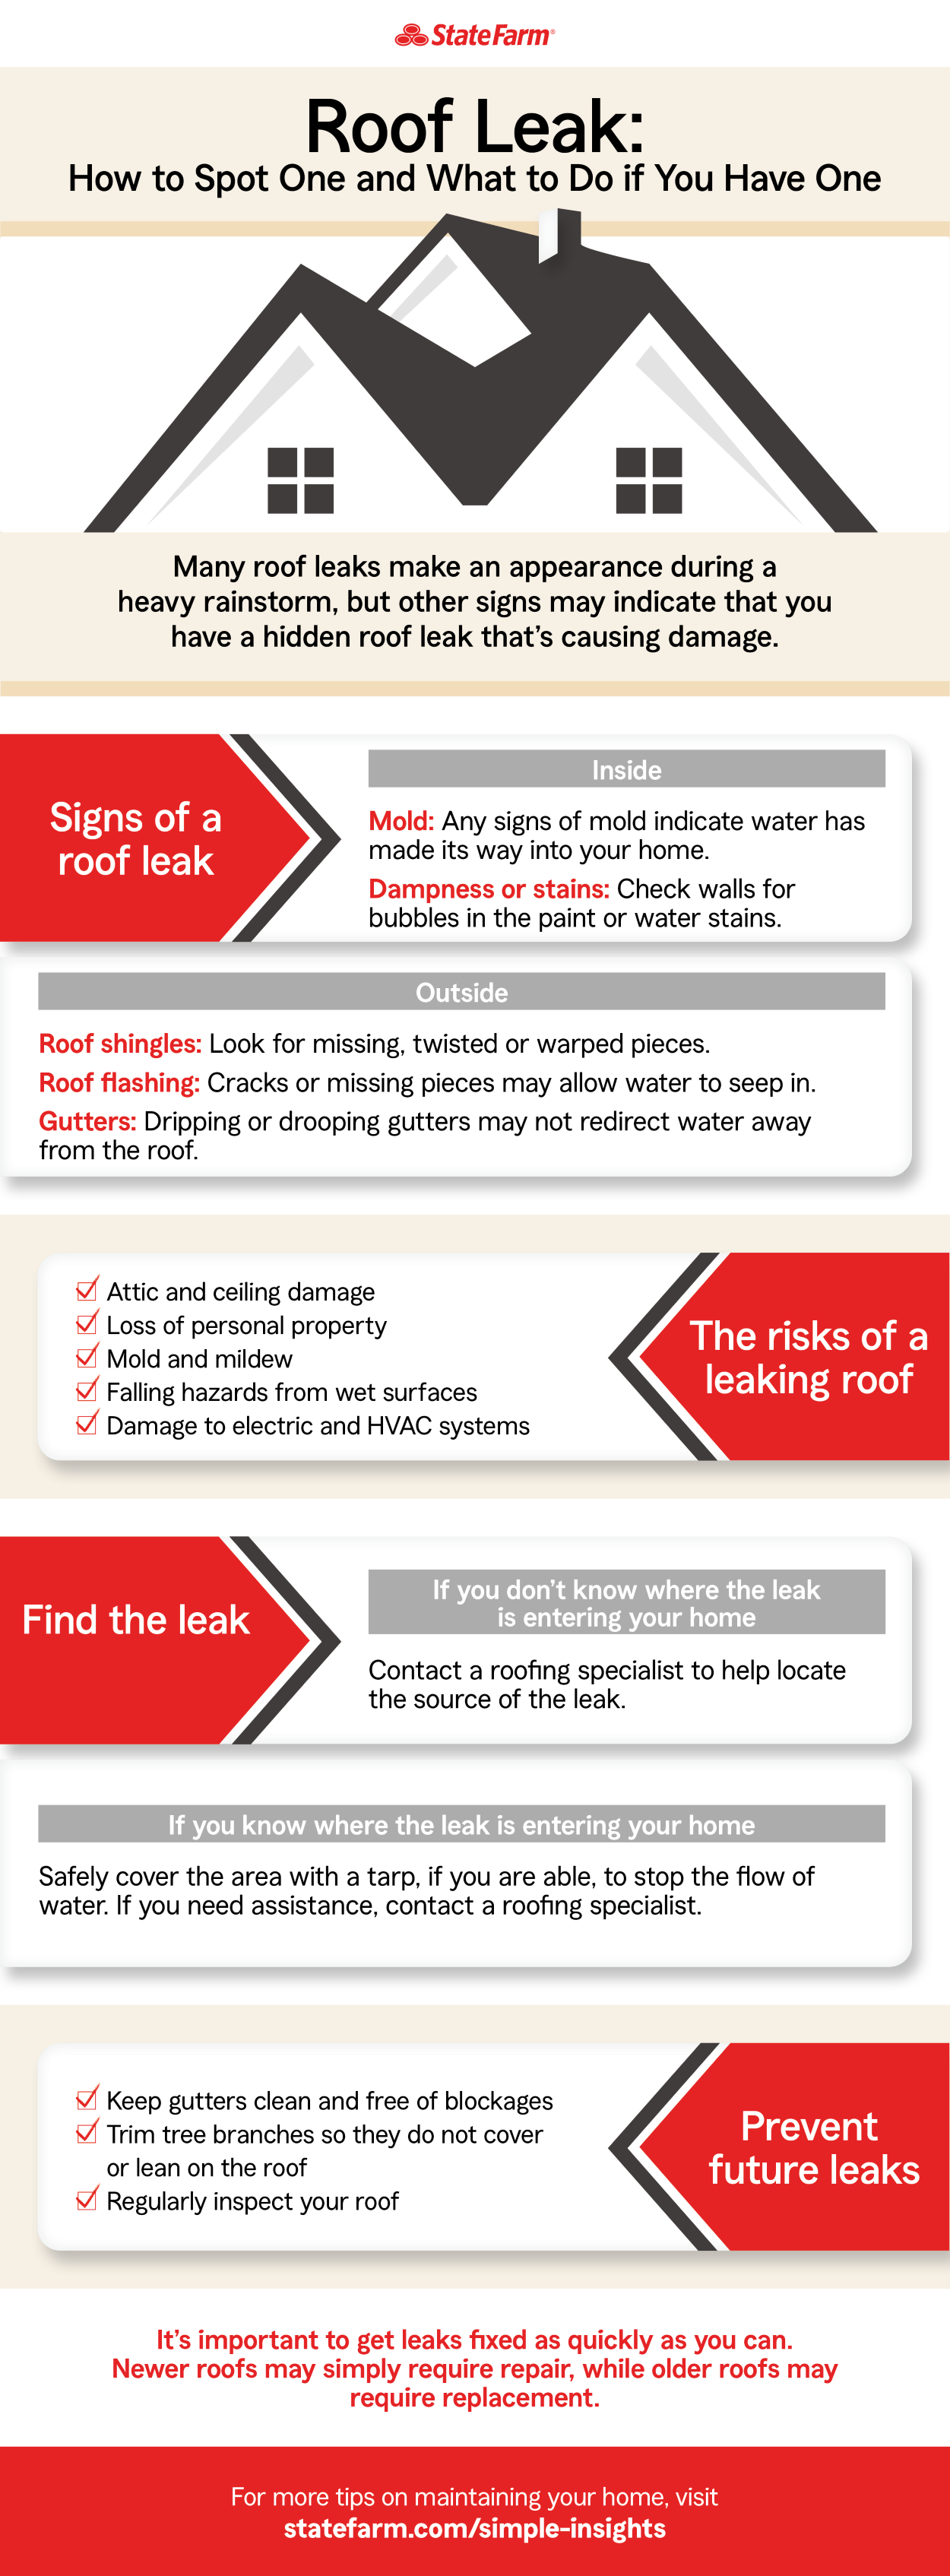 Infographic that shows how to spot a roof leak and what to do if you have one.